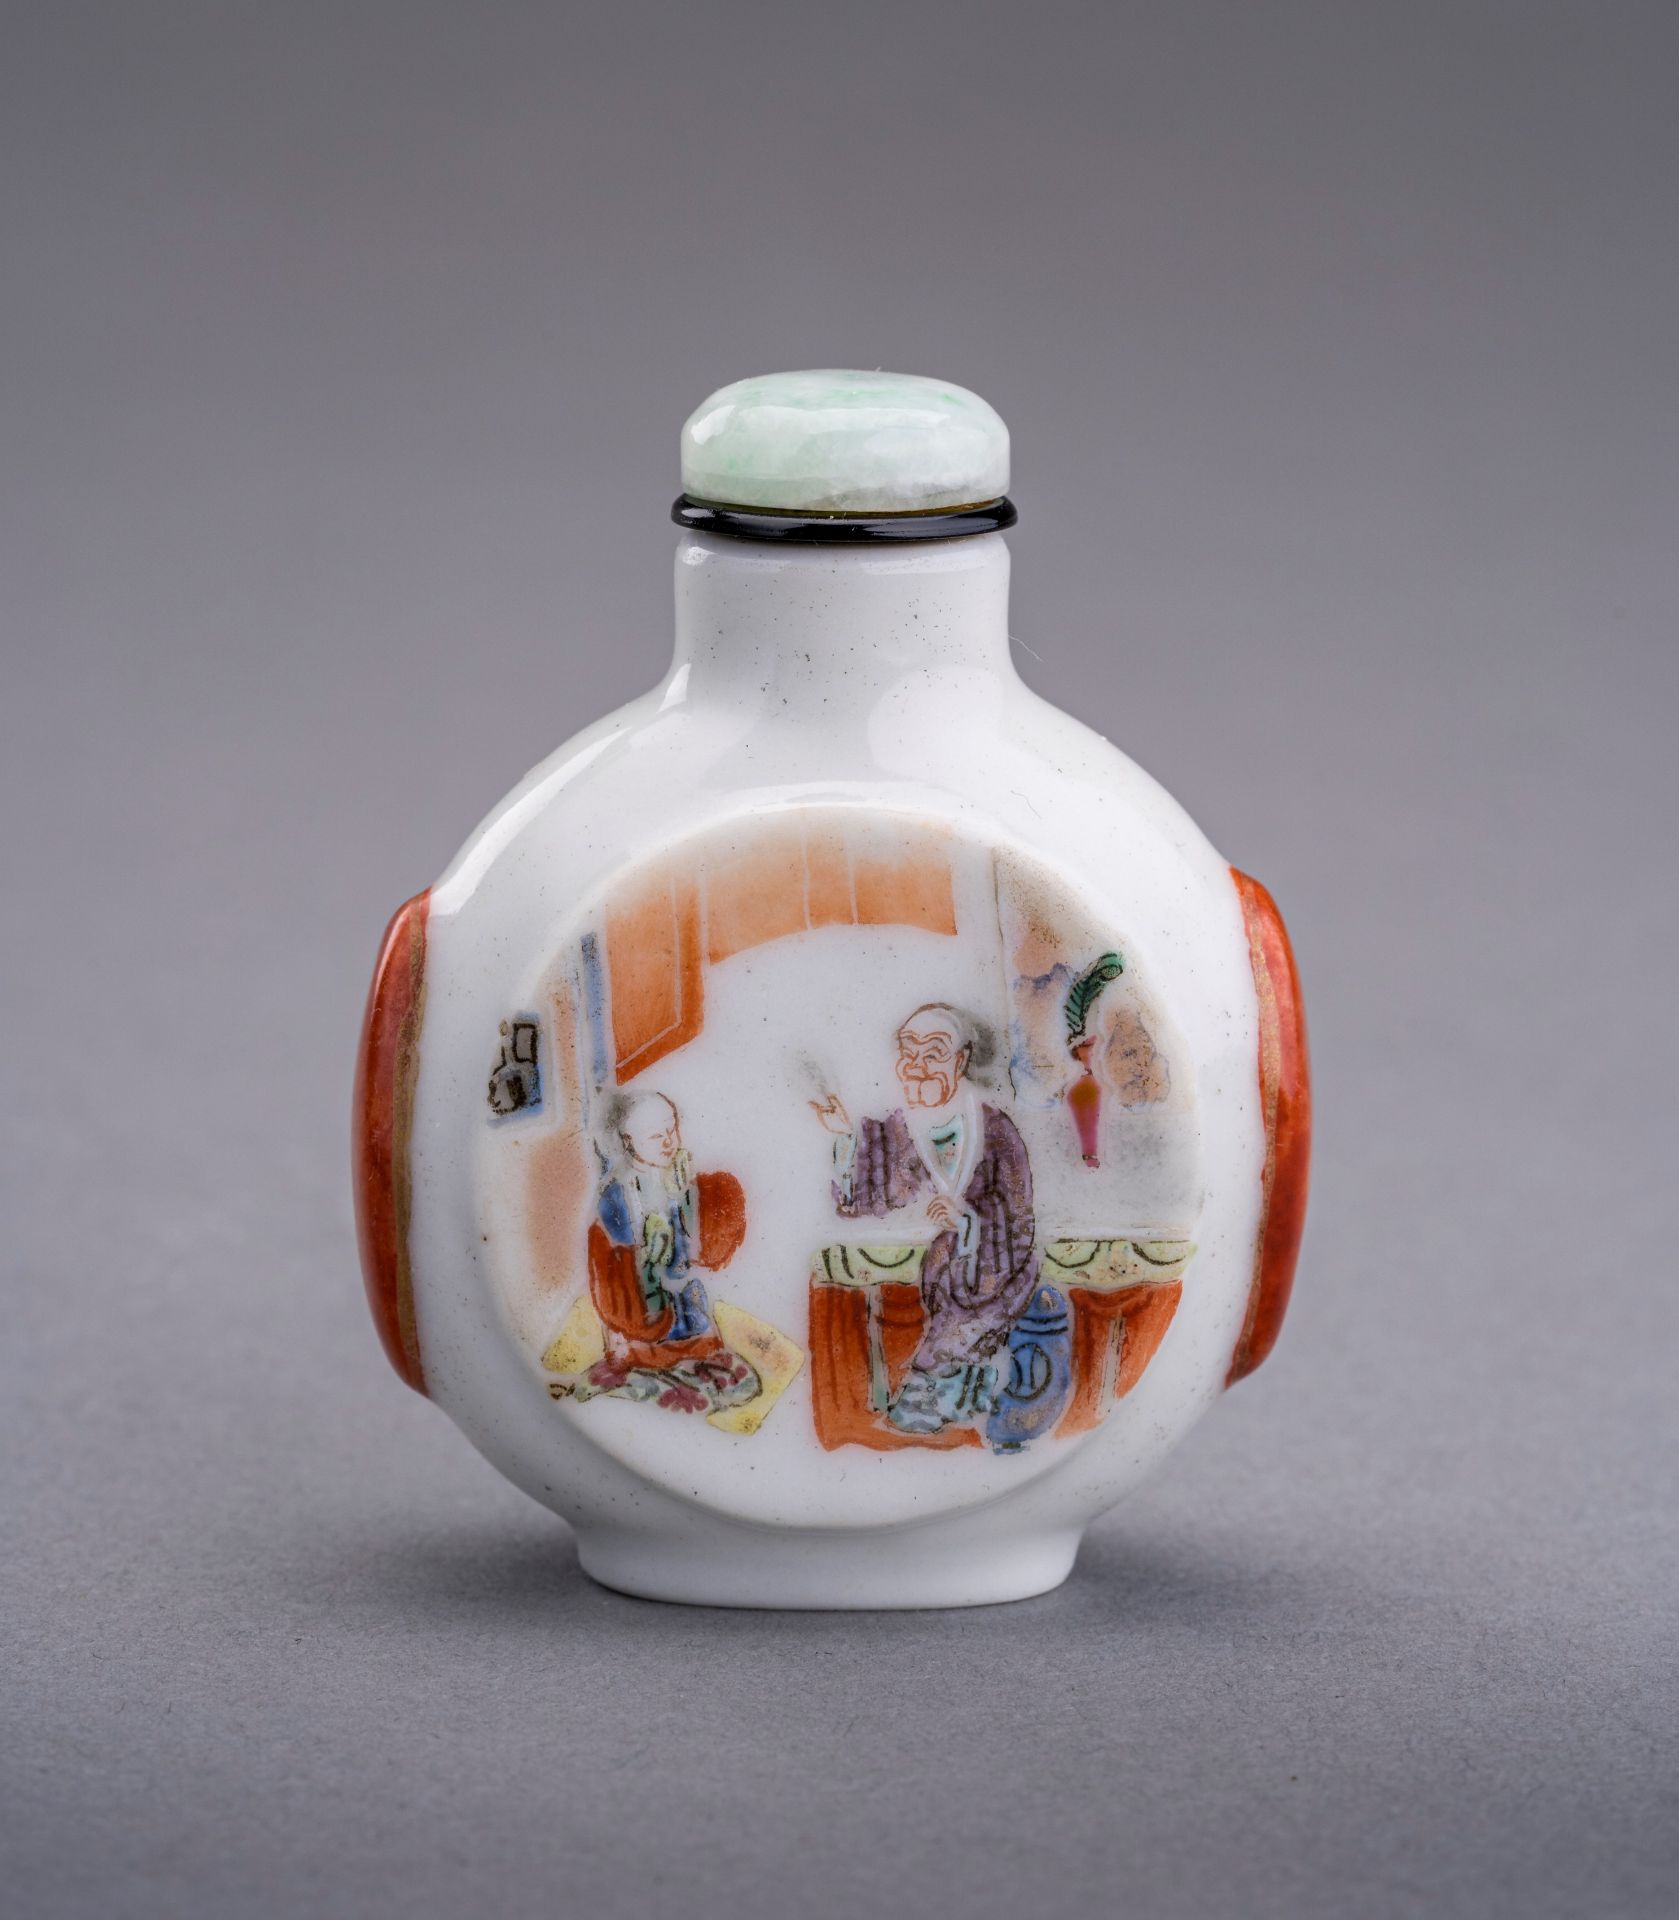 AN ENAMELLED PORCELAIN 'JOURNEY TO THE WEST' SNUFF BOTTLE, QING DYNASTY